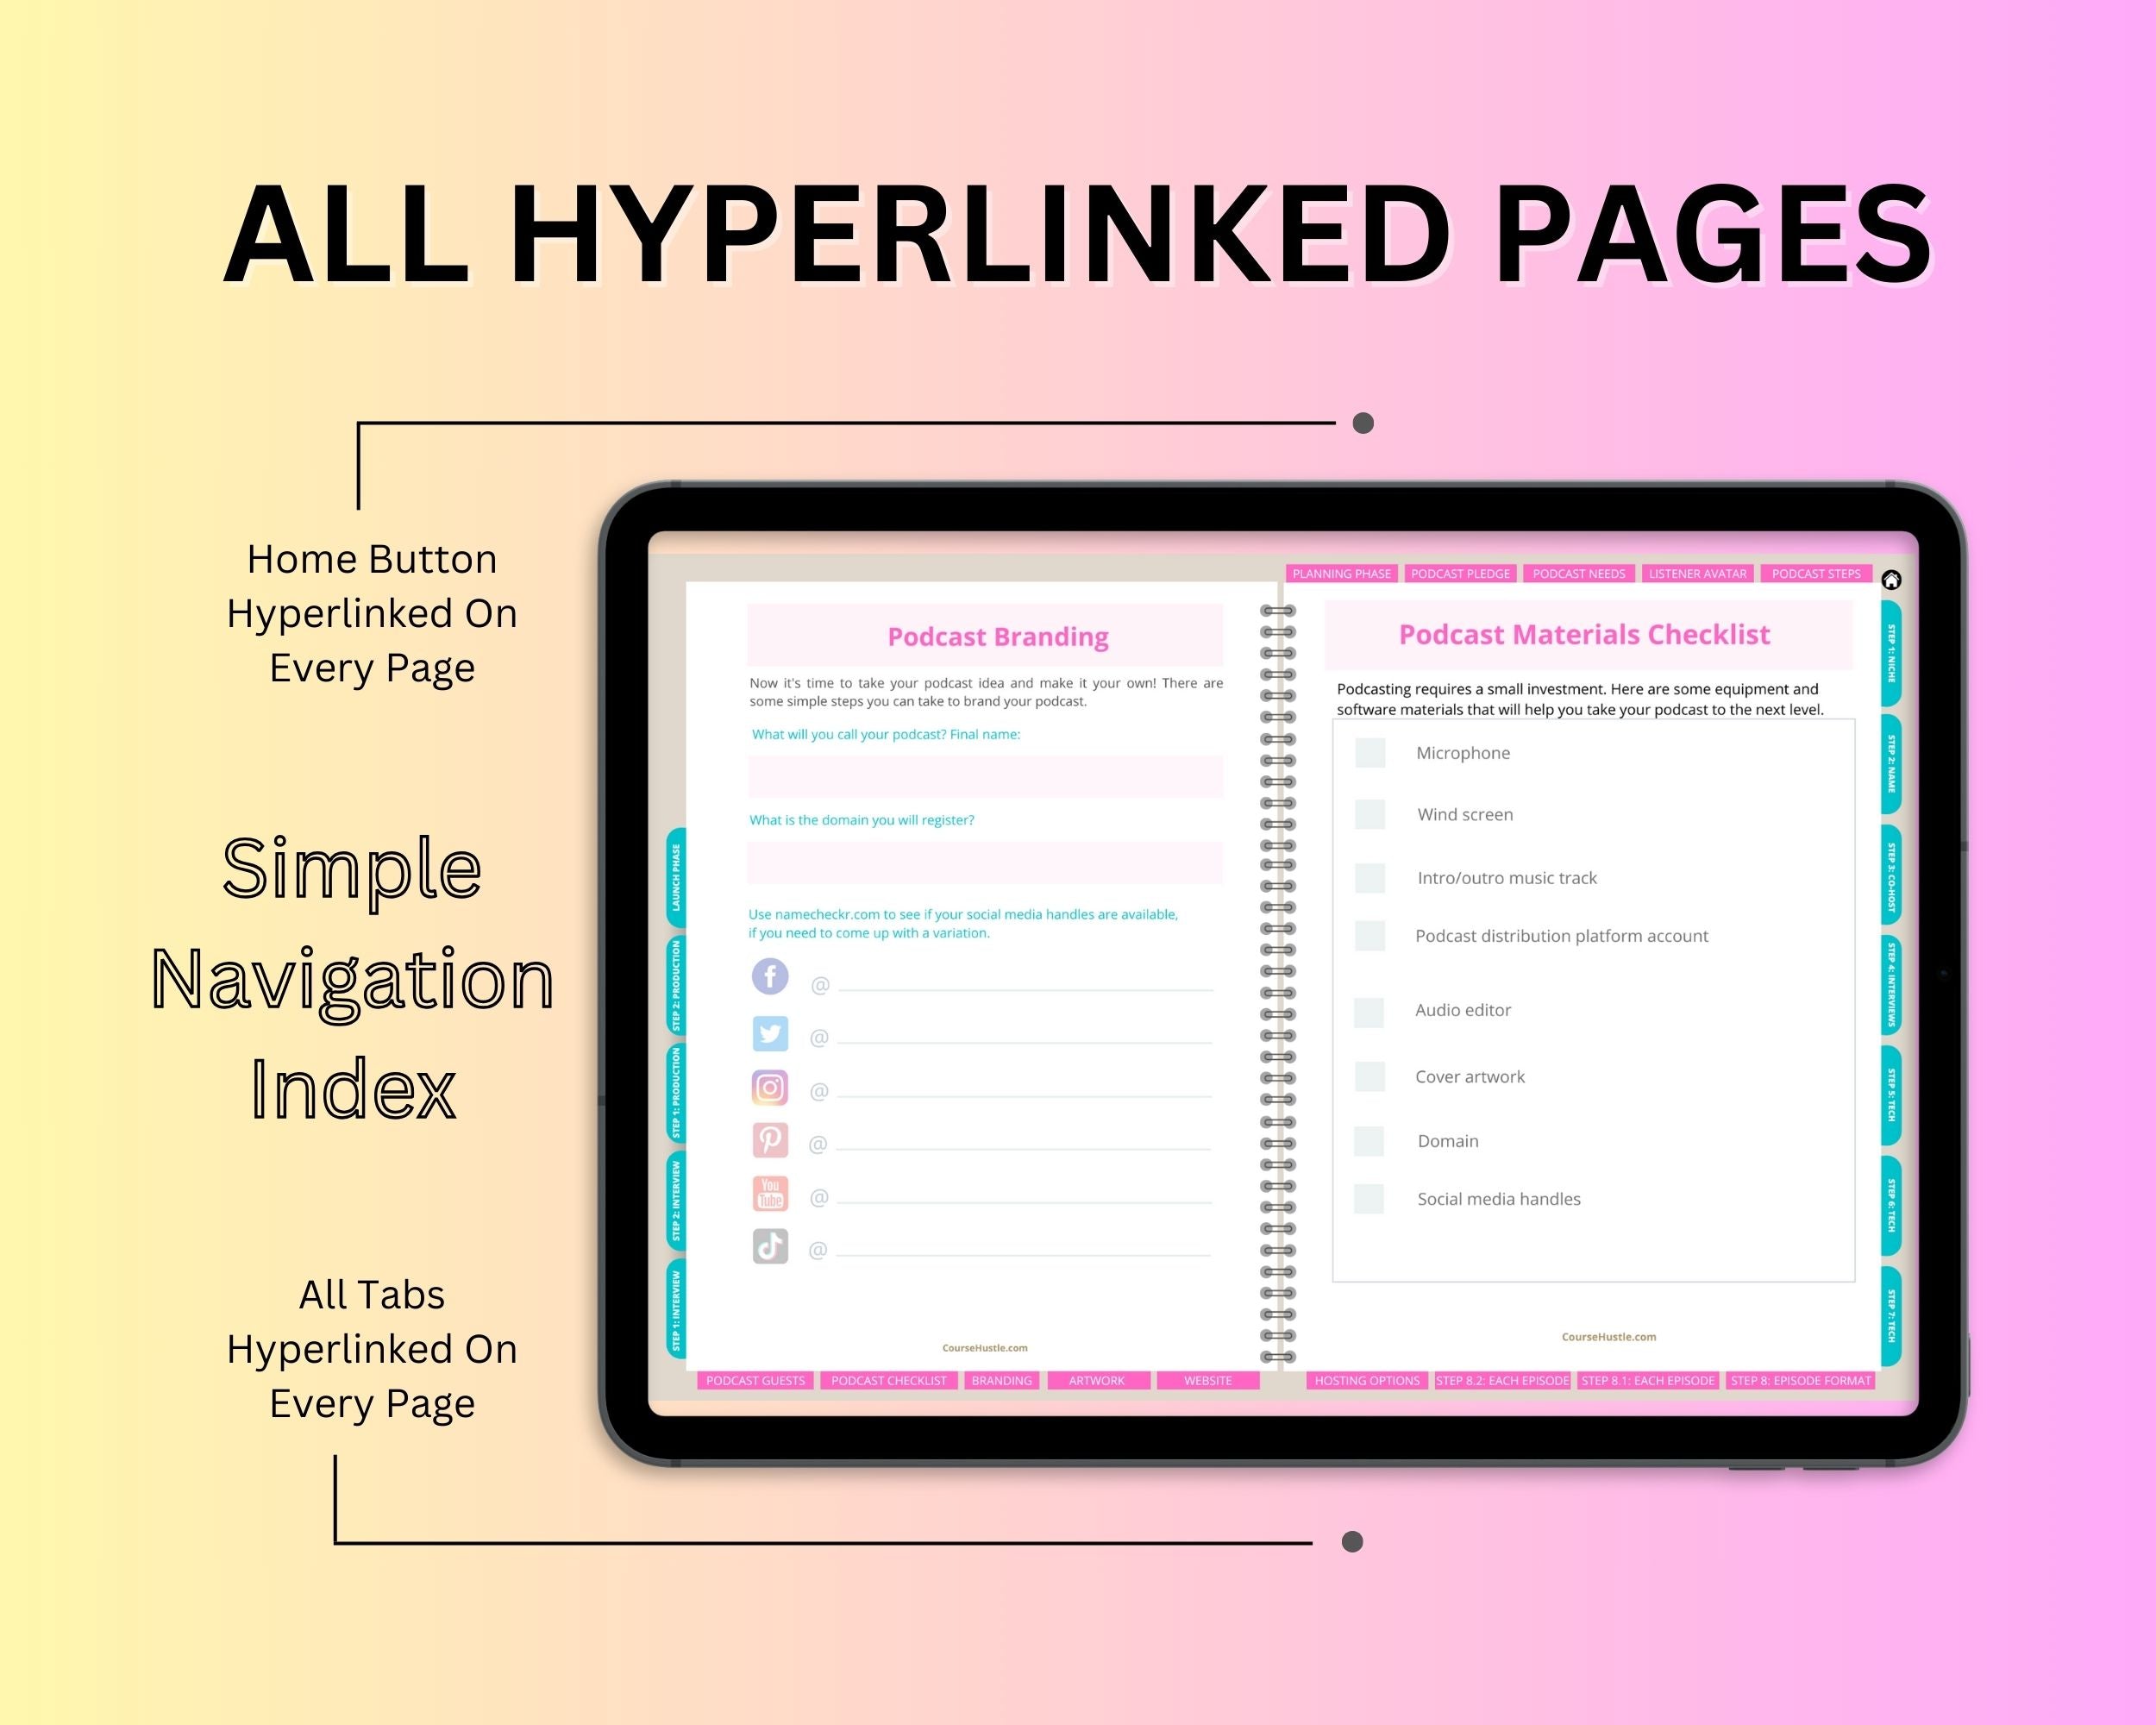 Podcast Workbook | Hyperlinked PDF | Suitable with Goodness & Notability